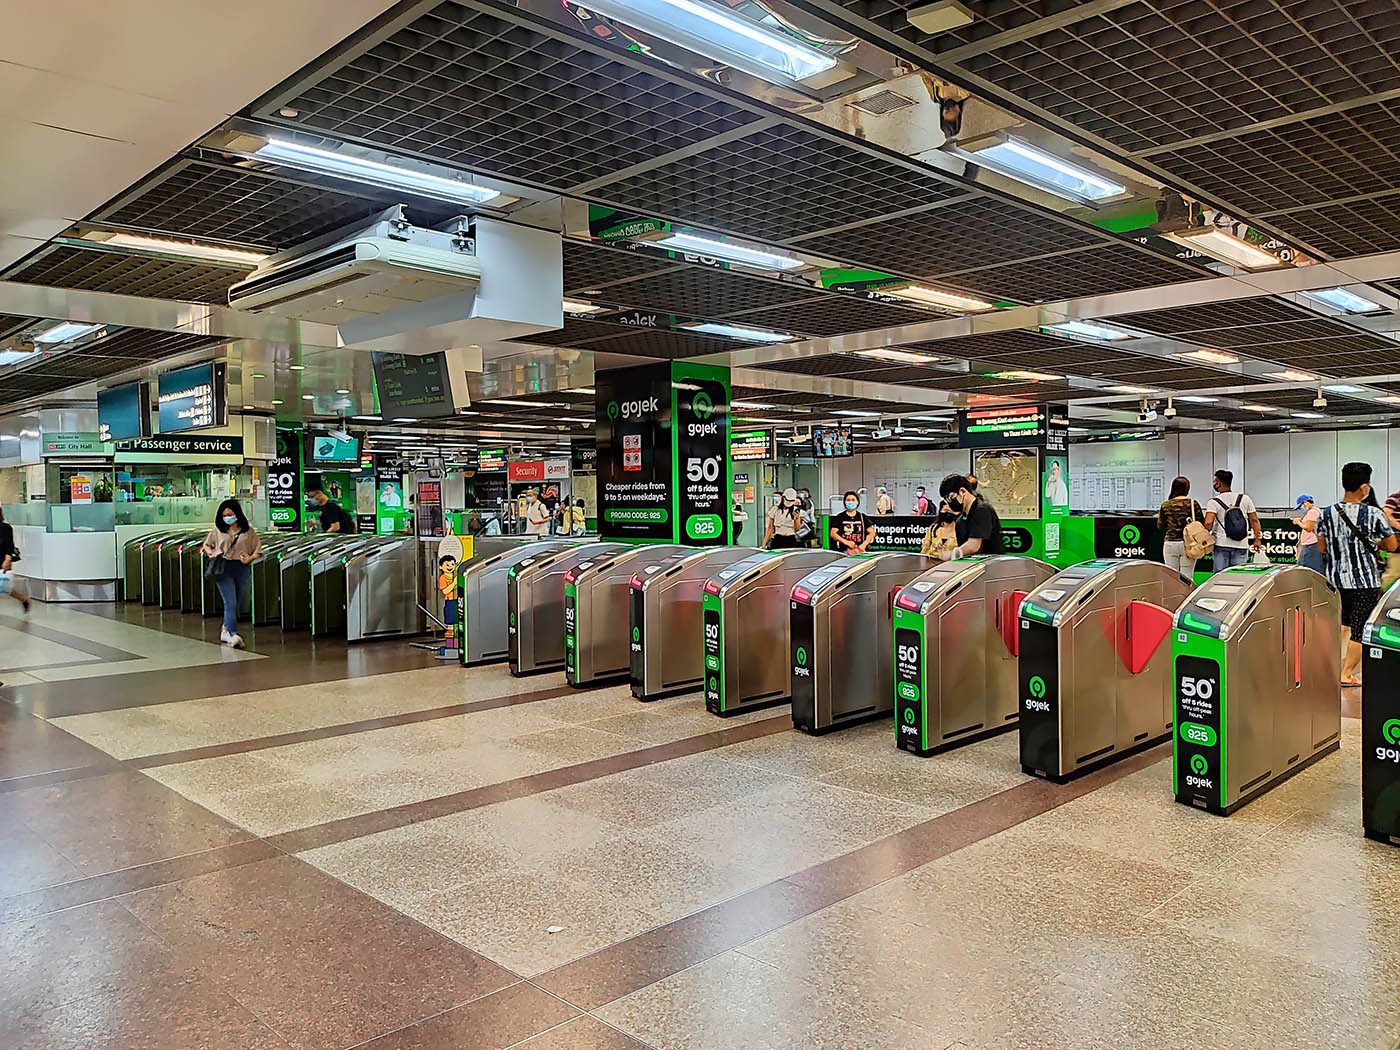 City Hall MRT Station - - Concourse and Fare Gates